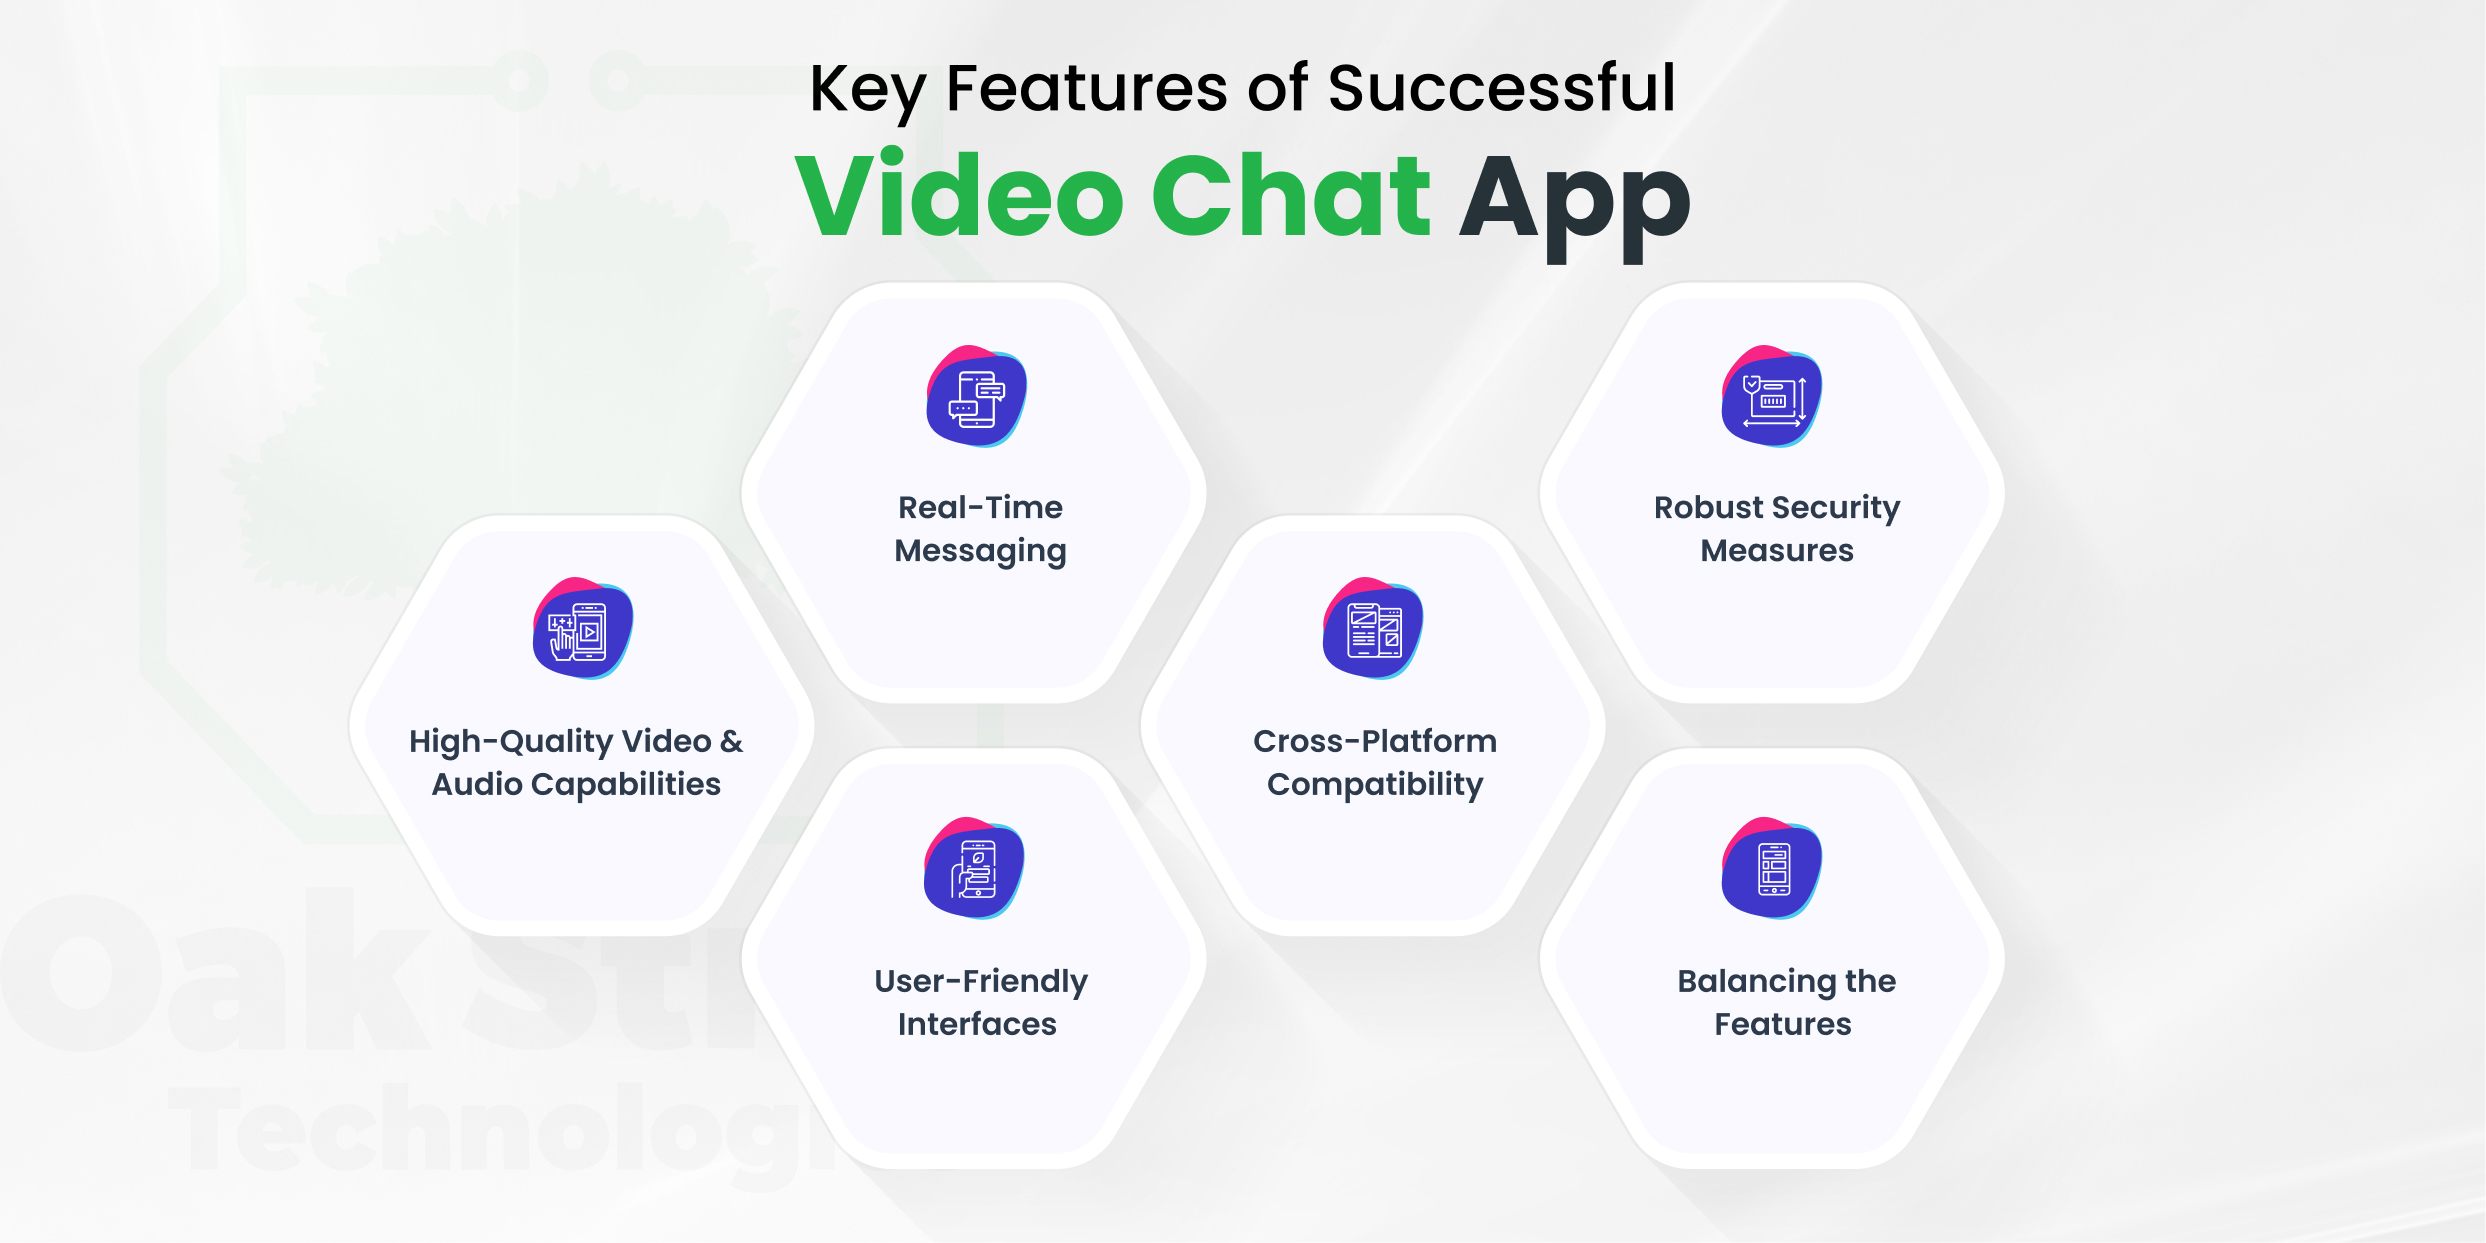 Key Features of Successful Video Chat App